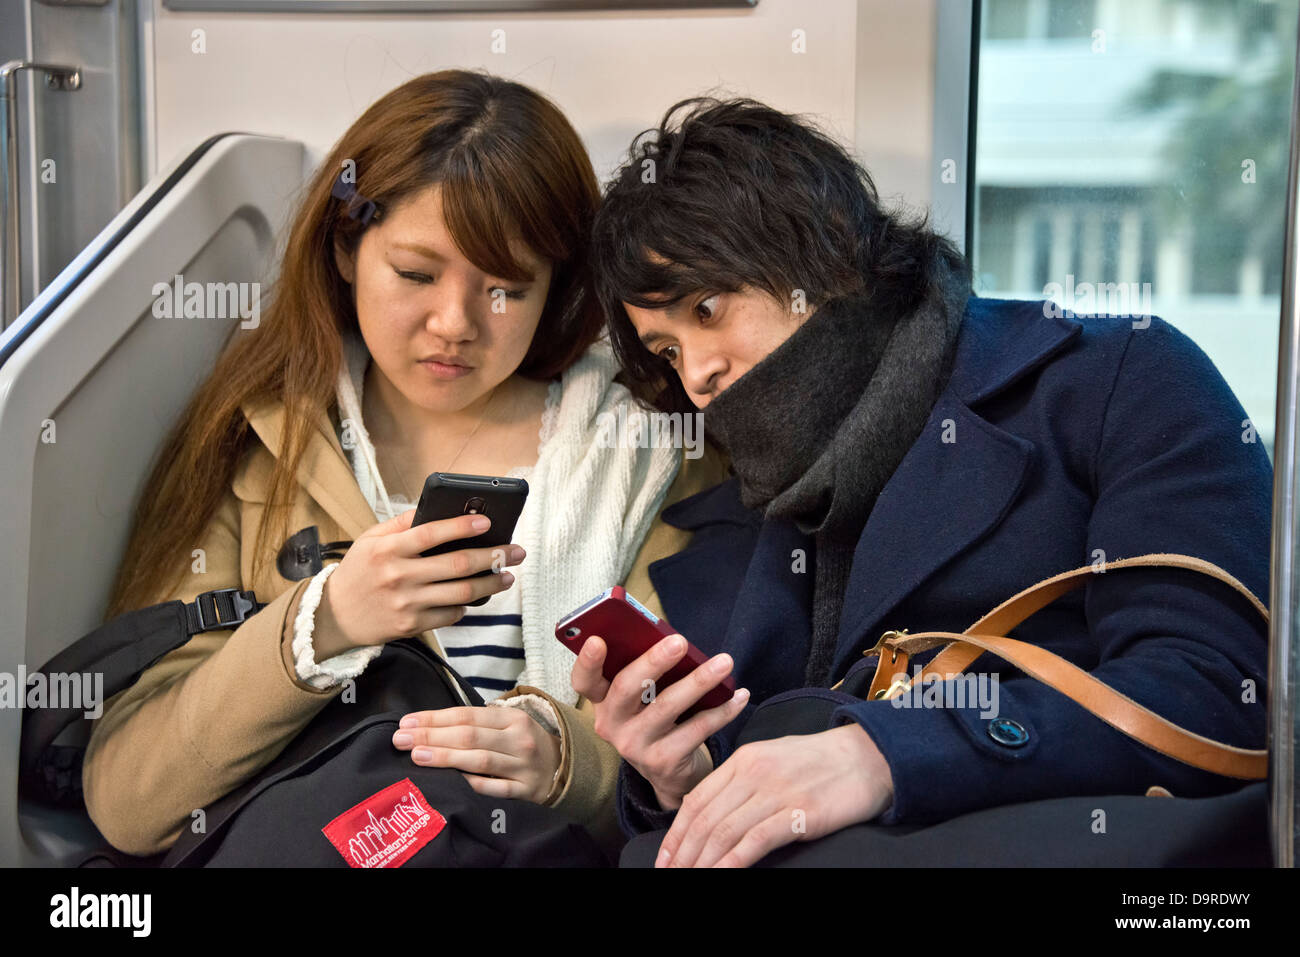 Young Couple with mobile phones on Tokyo Metro Stock Photo